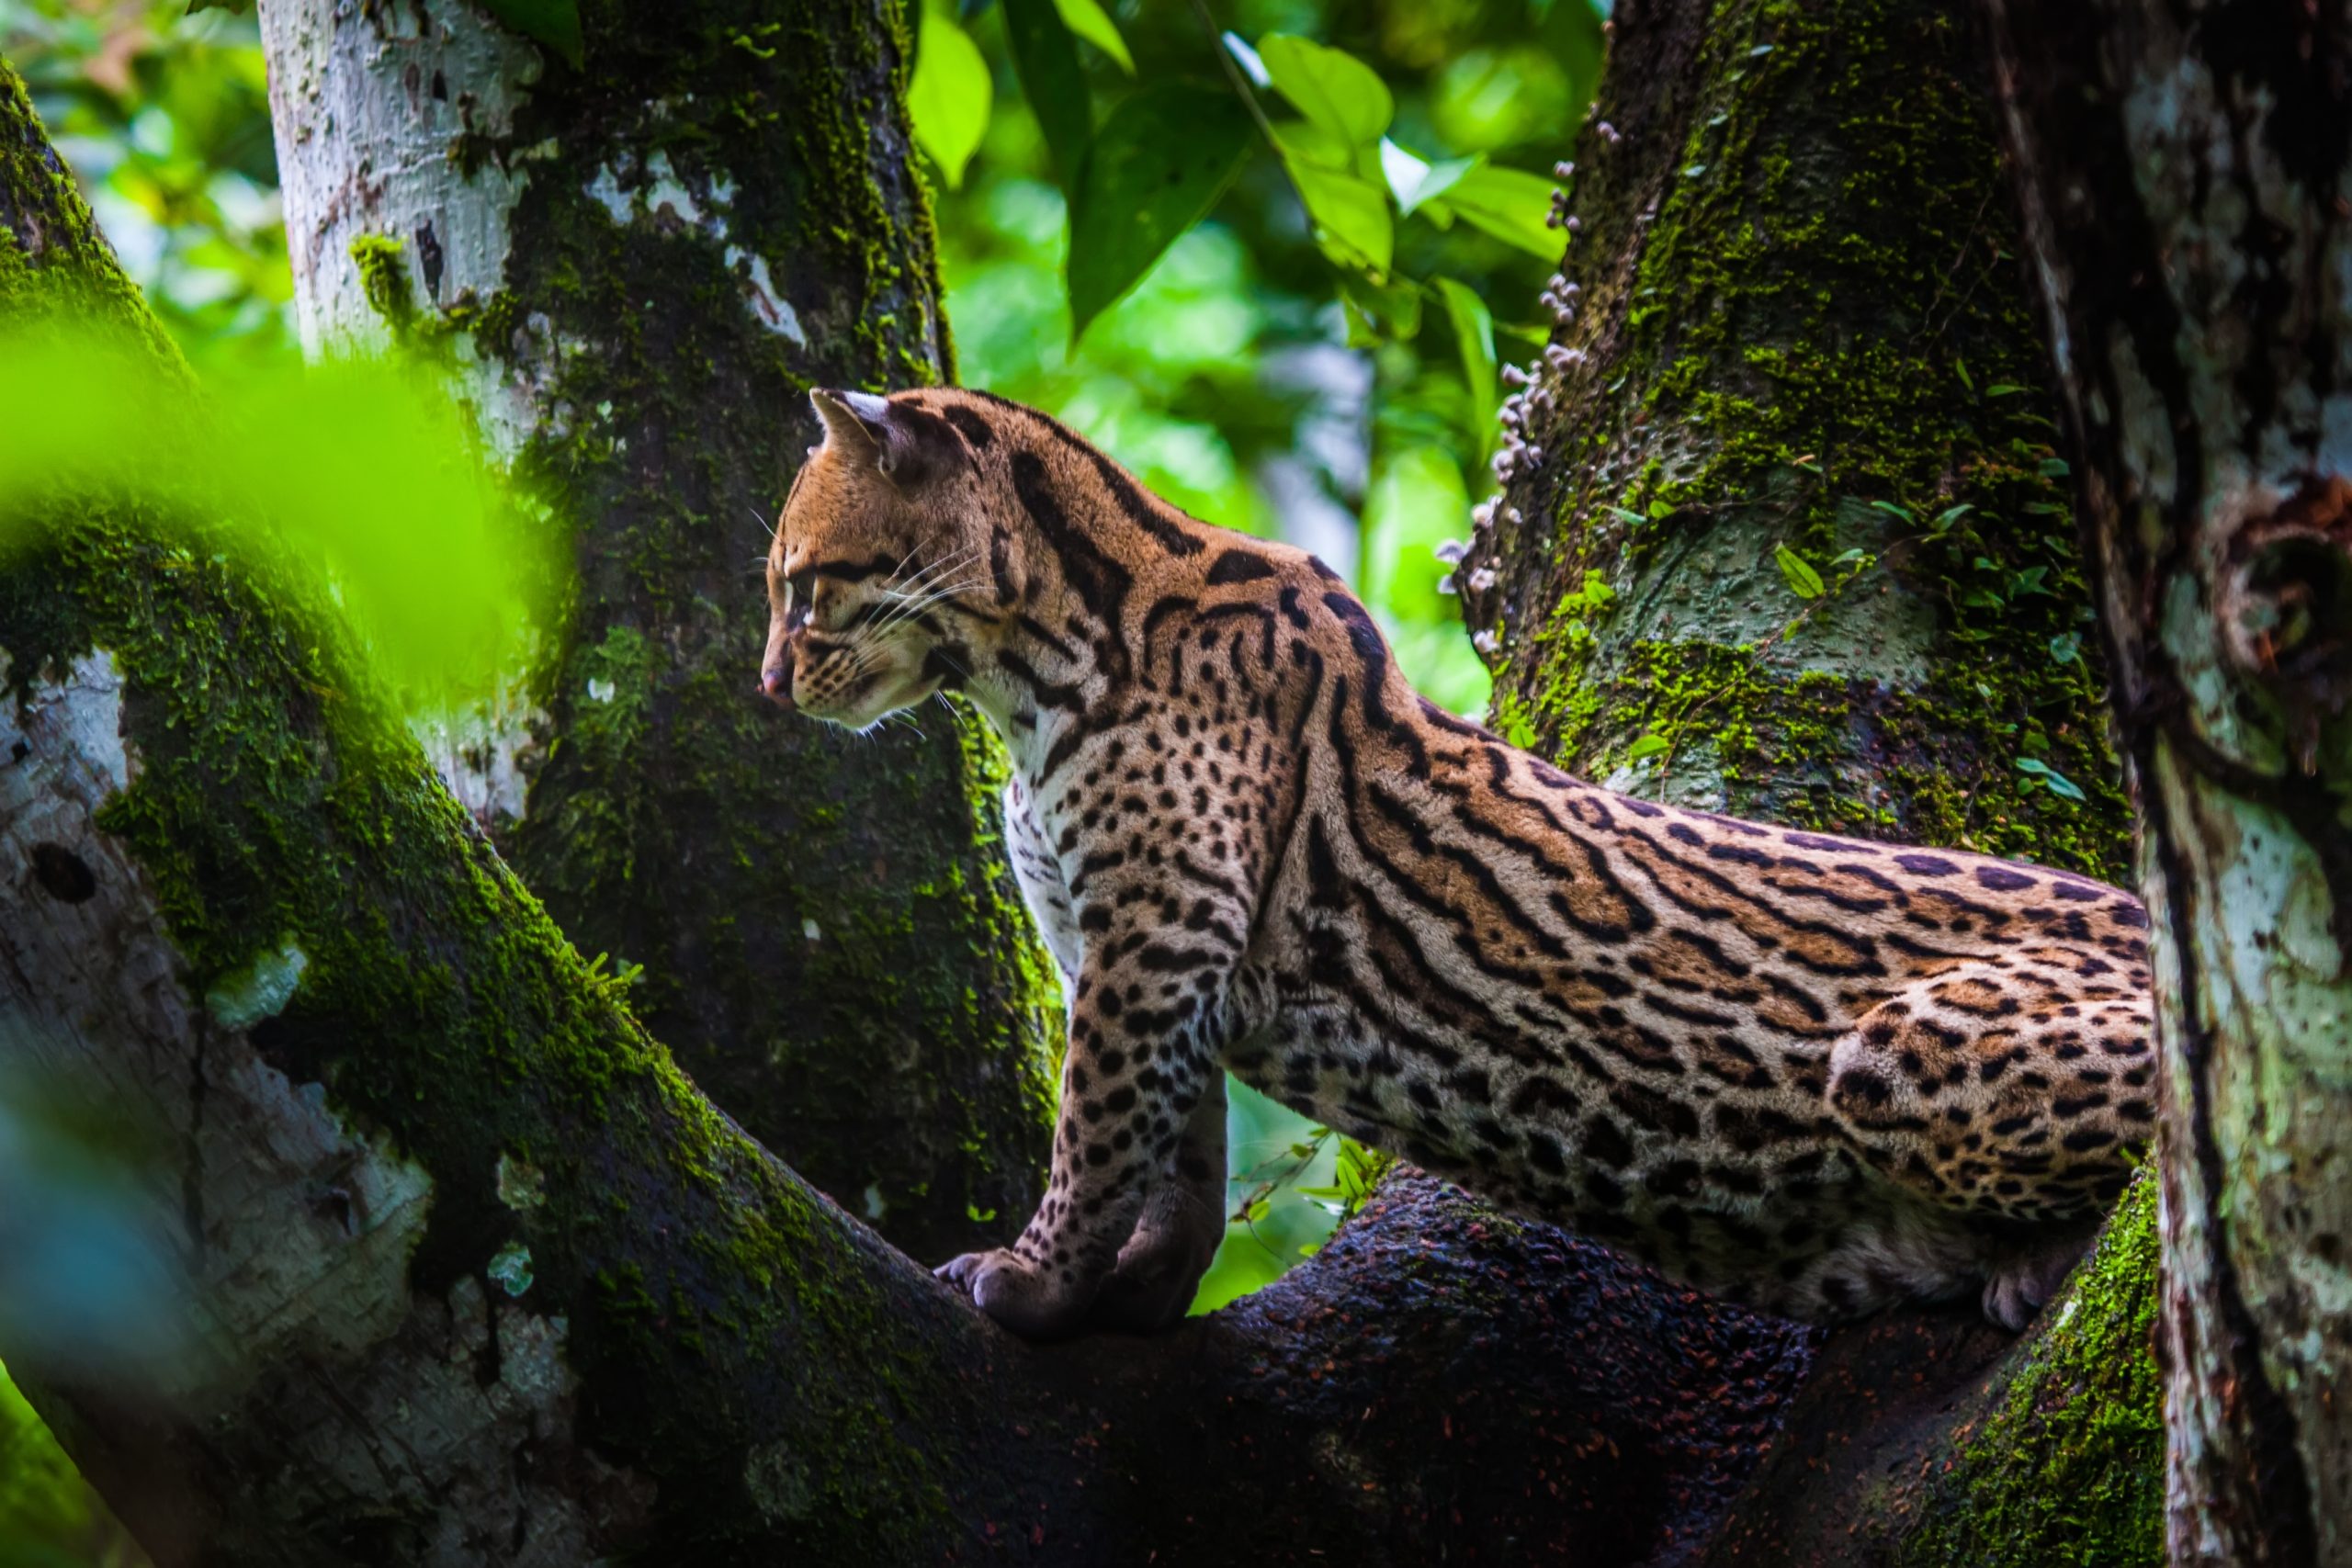 Leopard standing on tree trunk and looking down